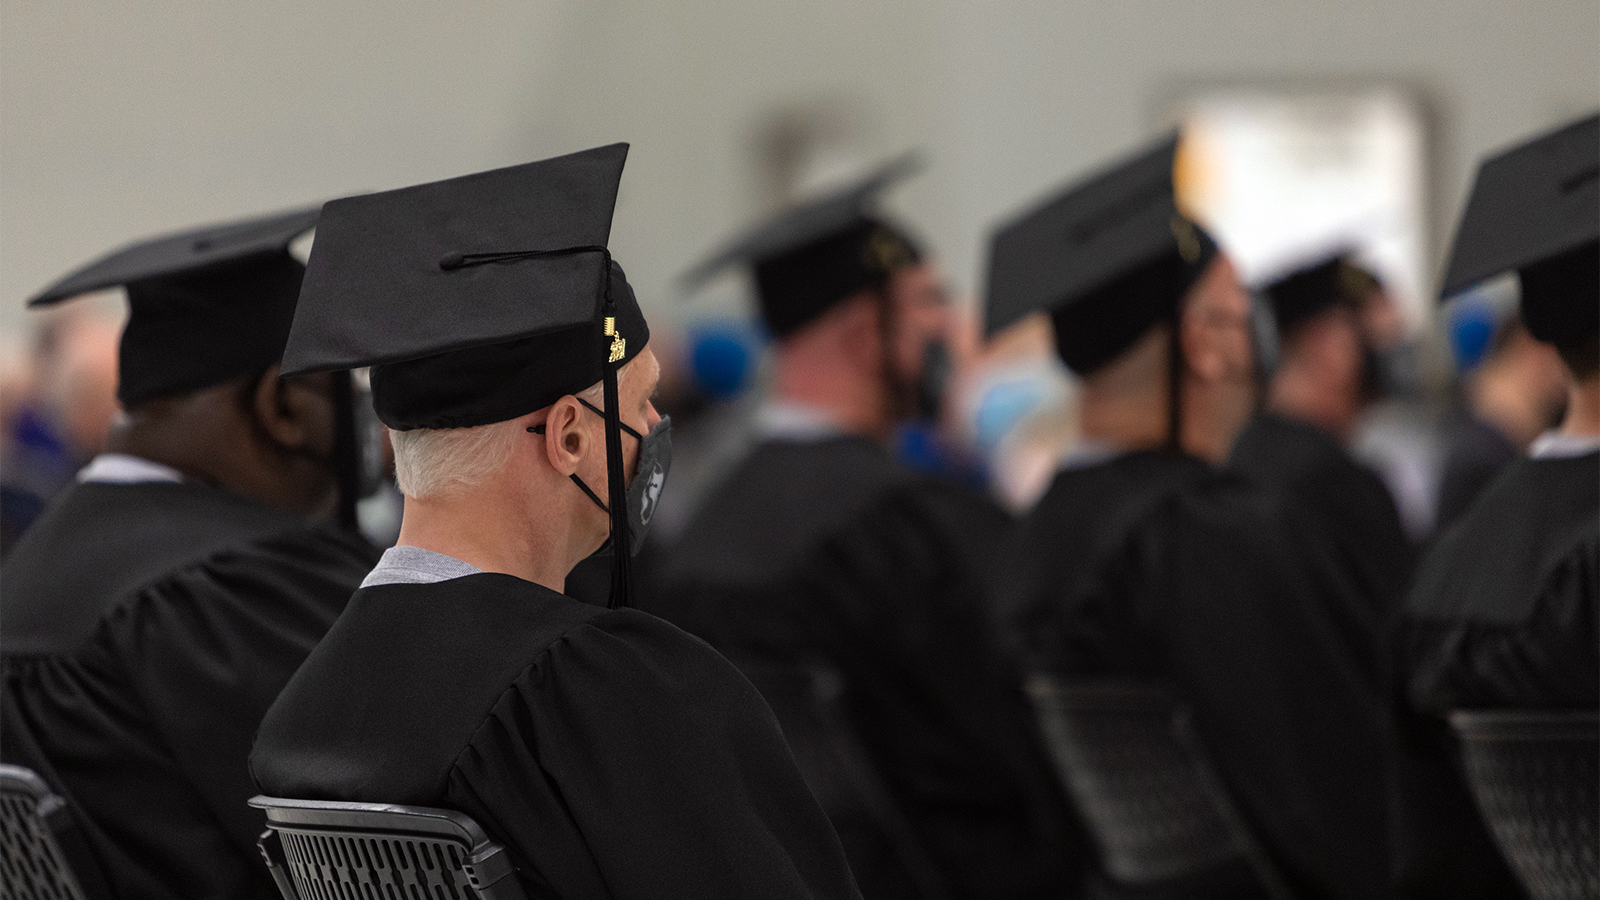 Graduating inmates attend their College at Southeastern graduation ceremony, Wednesday, Dec. 15, 2021, at Nash Correctional Institution in Nashville, North Carolina. Photo courtesy of Southeastern Baptist Theological Seminary in Wake Forest, North Carolina